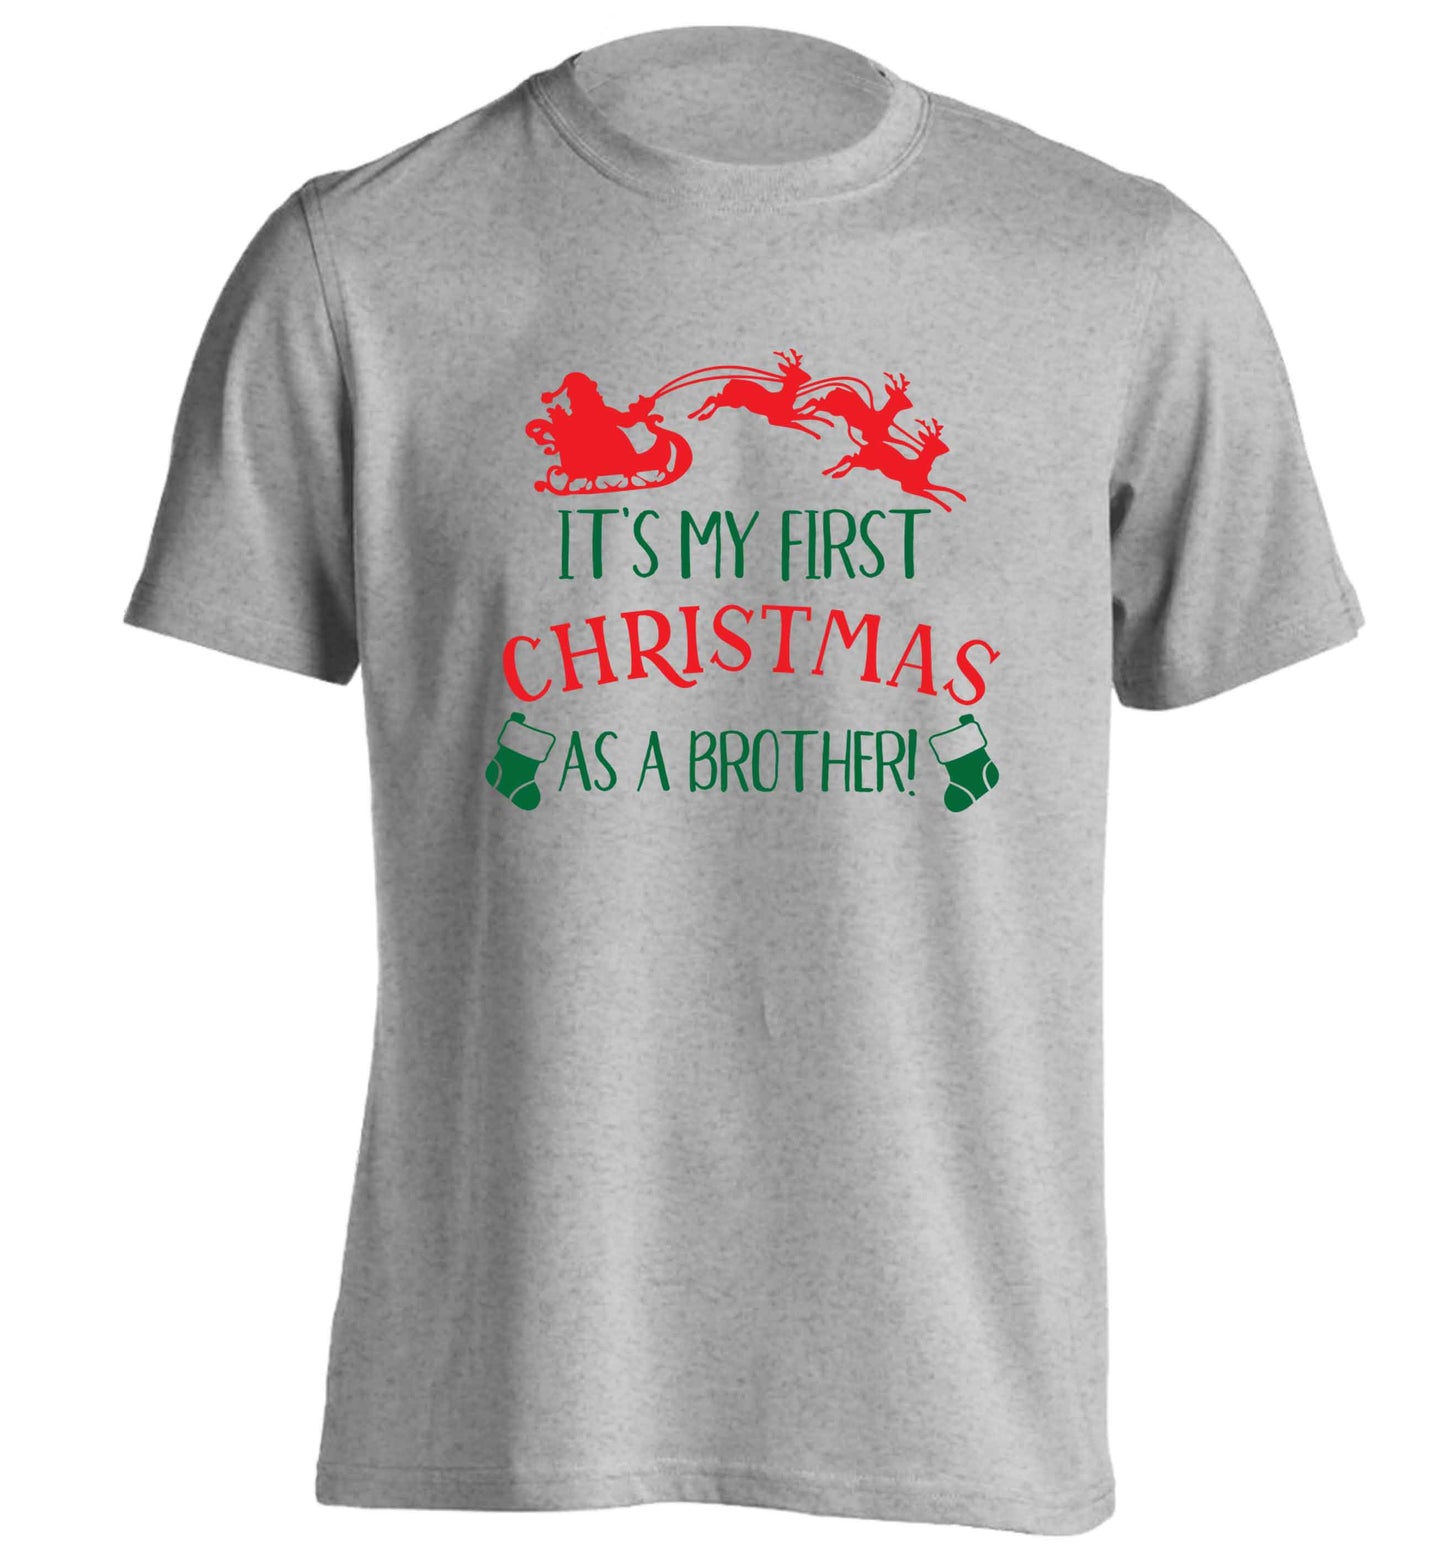 It's my first Christmas as a brother! adults unisex grey Tshirt 2XL